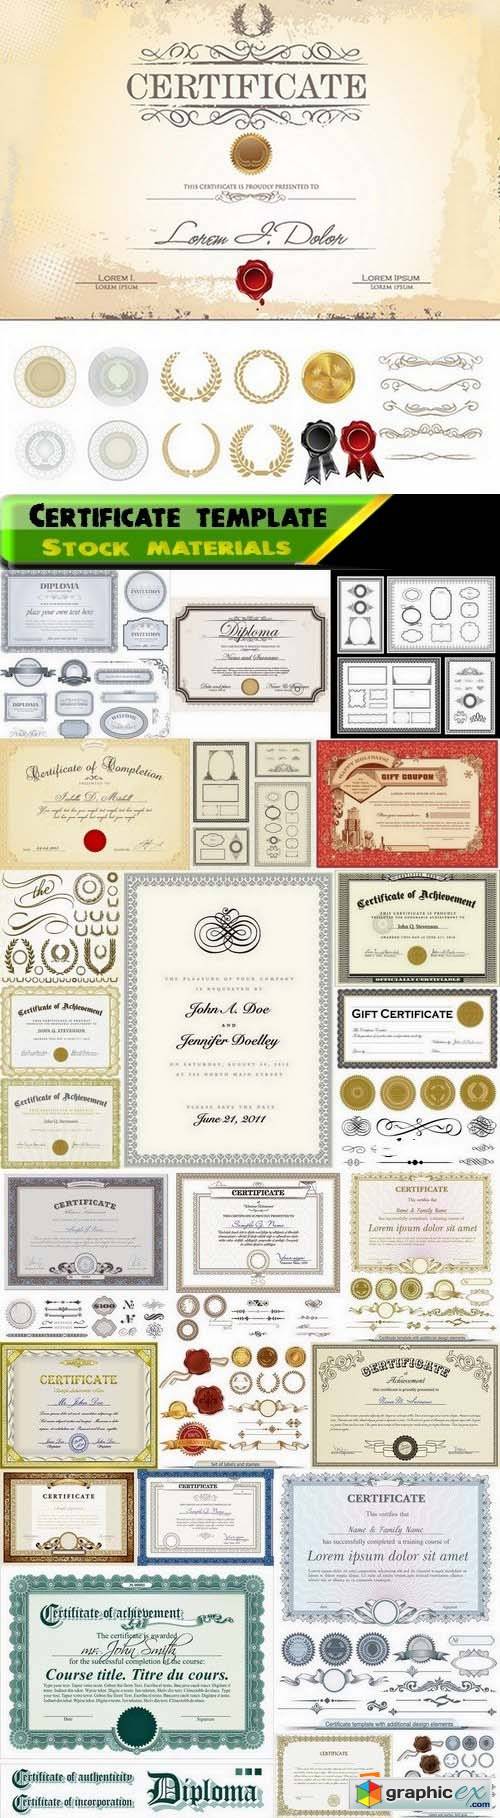 Certificate Templates, Patterns and Elements